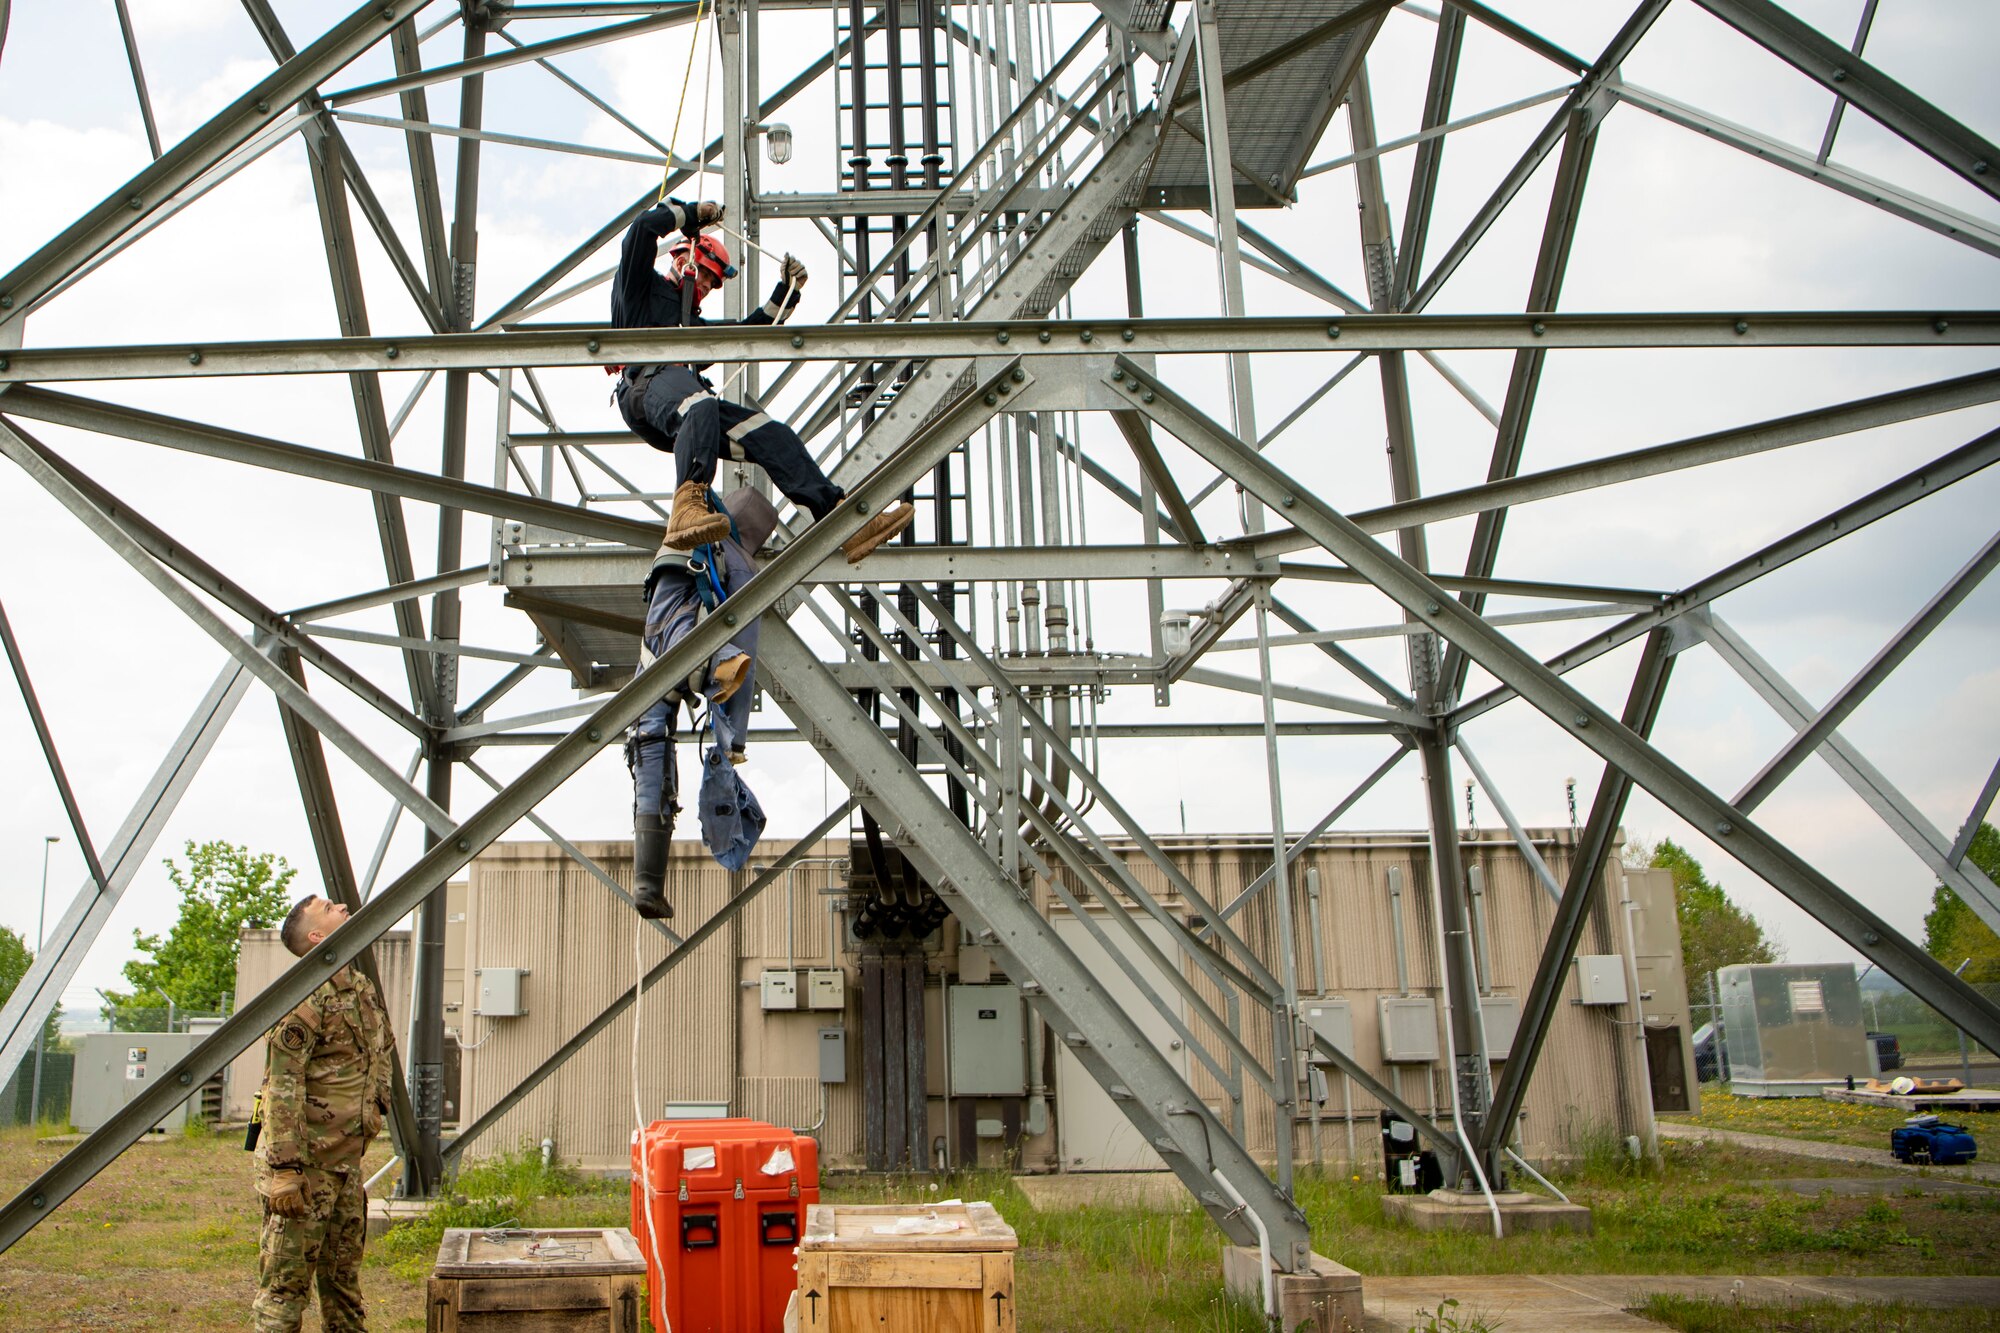 Airman 1st Class Issac Painter, 52nd Civil Engineer Squadron firefighter, rappels down a radio tower with a rescue dummy during a Fall Rescue demonstration, May 4, 2022, on Spangdahlem Air Base, Germany. The demonstration was held to show how firefighters rescue someone who has fallen over the side of a radar tower and to stress the importance of using fall protection equipment correctly. (U.S. Air Force photo by Airman 1st Class Jessica Sanchez-Chen)